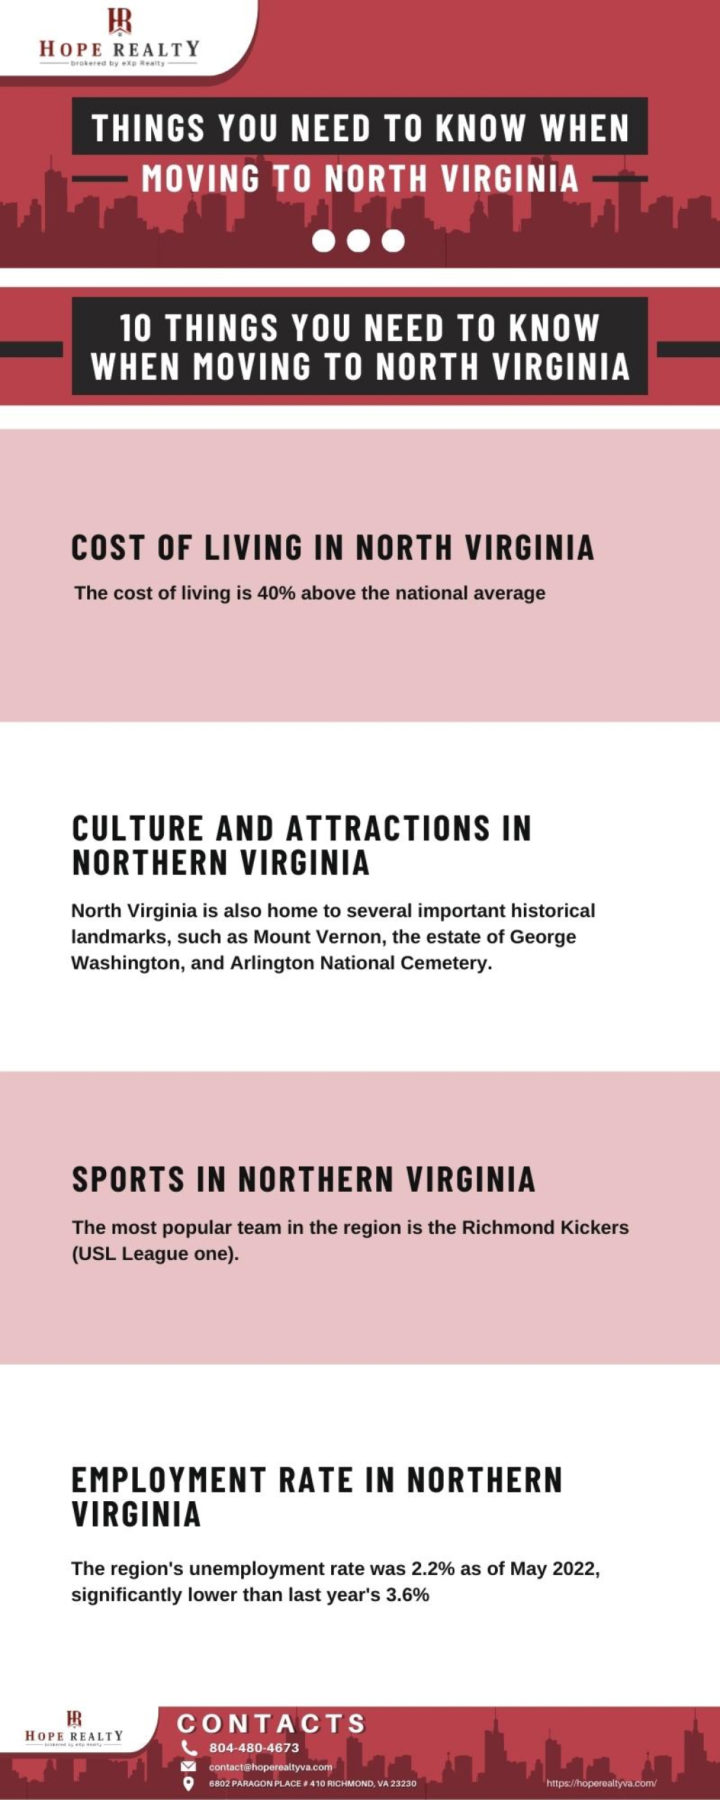 Things You Need To Know When Moving to North Virginia